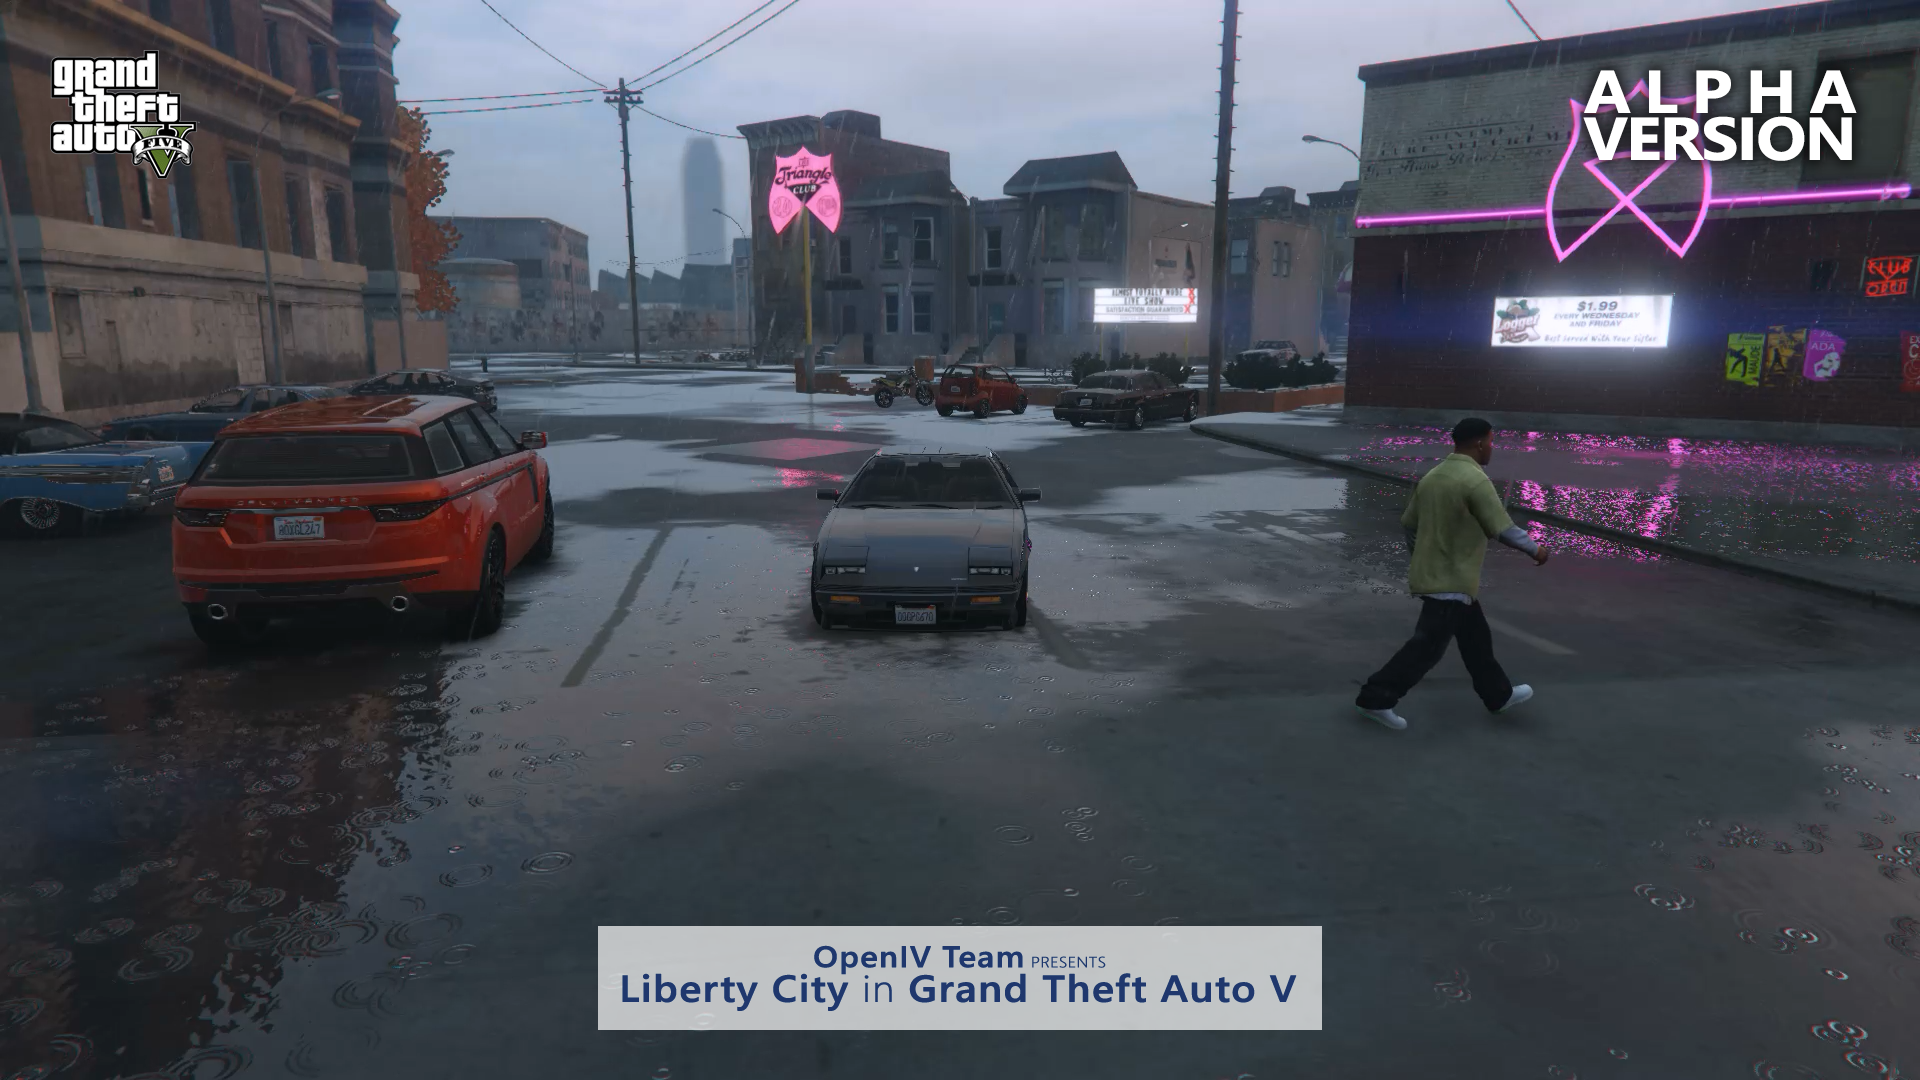 Open IV's Liberty City GTA V mod has been cancelled